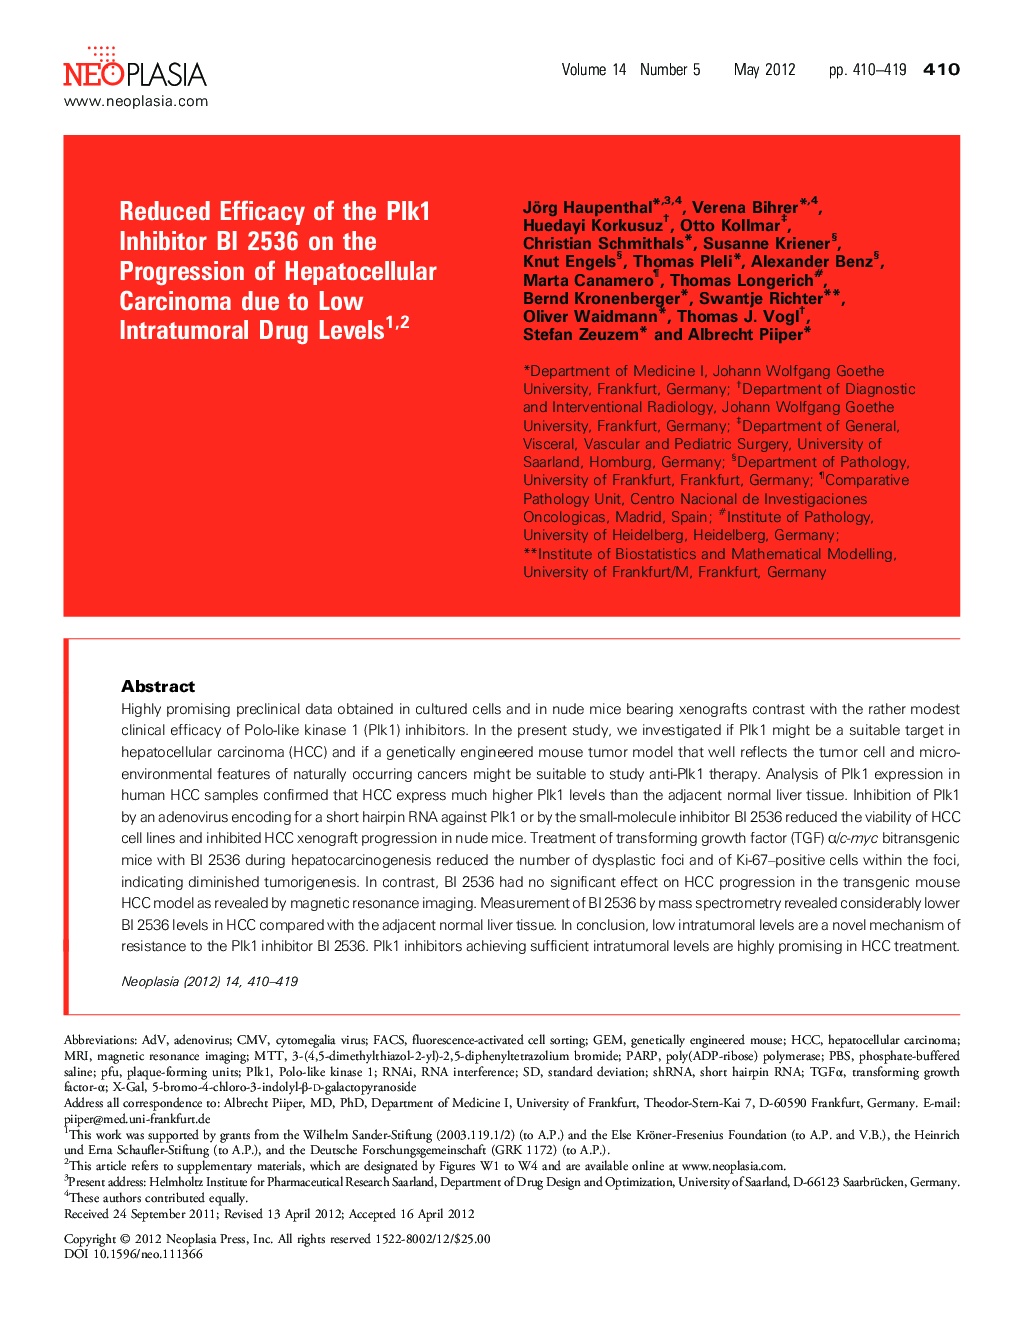 Reduced Efficacy of the Plk1 Inhibitor BI 2536 on the Progression of Hepatocellular Carcinoma due to Low Intratumoral Drug Levels